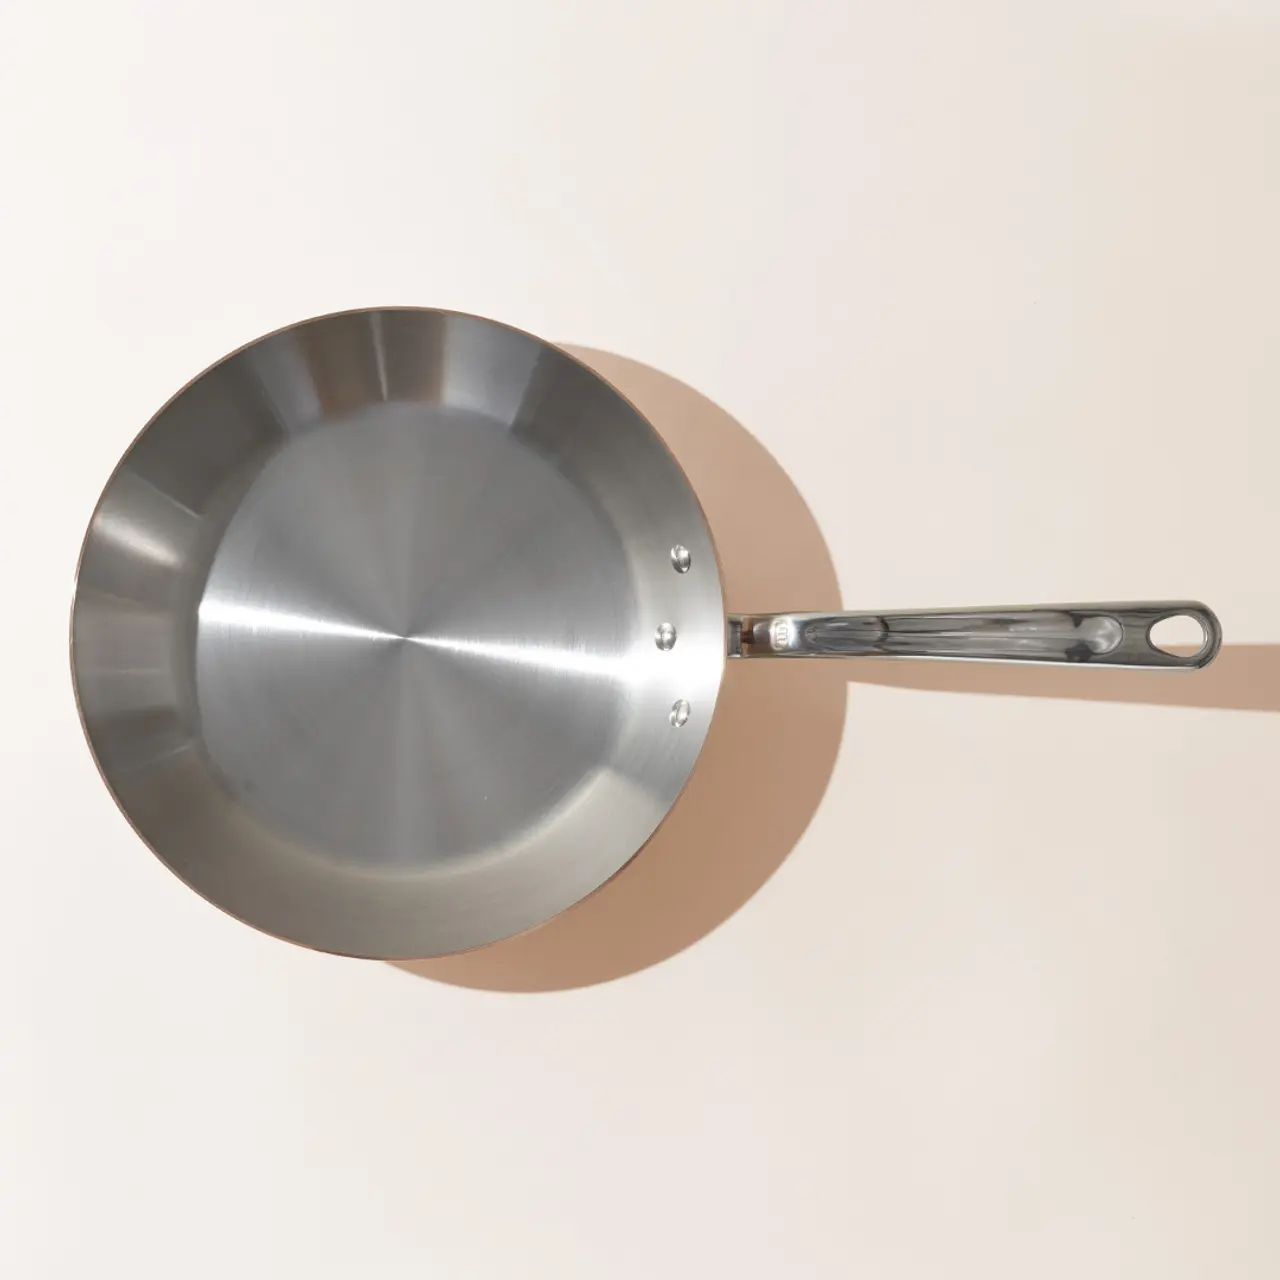 A stainless steel frying pan with a long handle is shown from above against a neutral background.